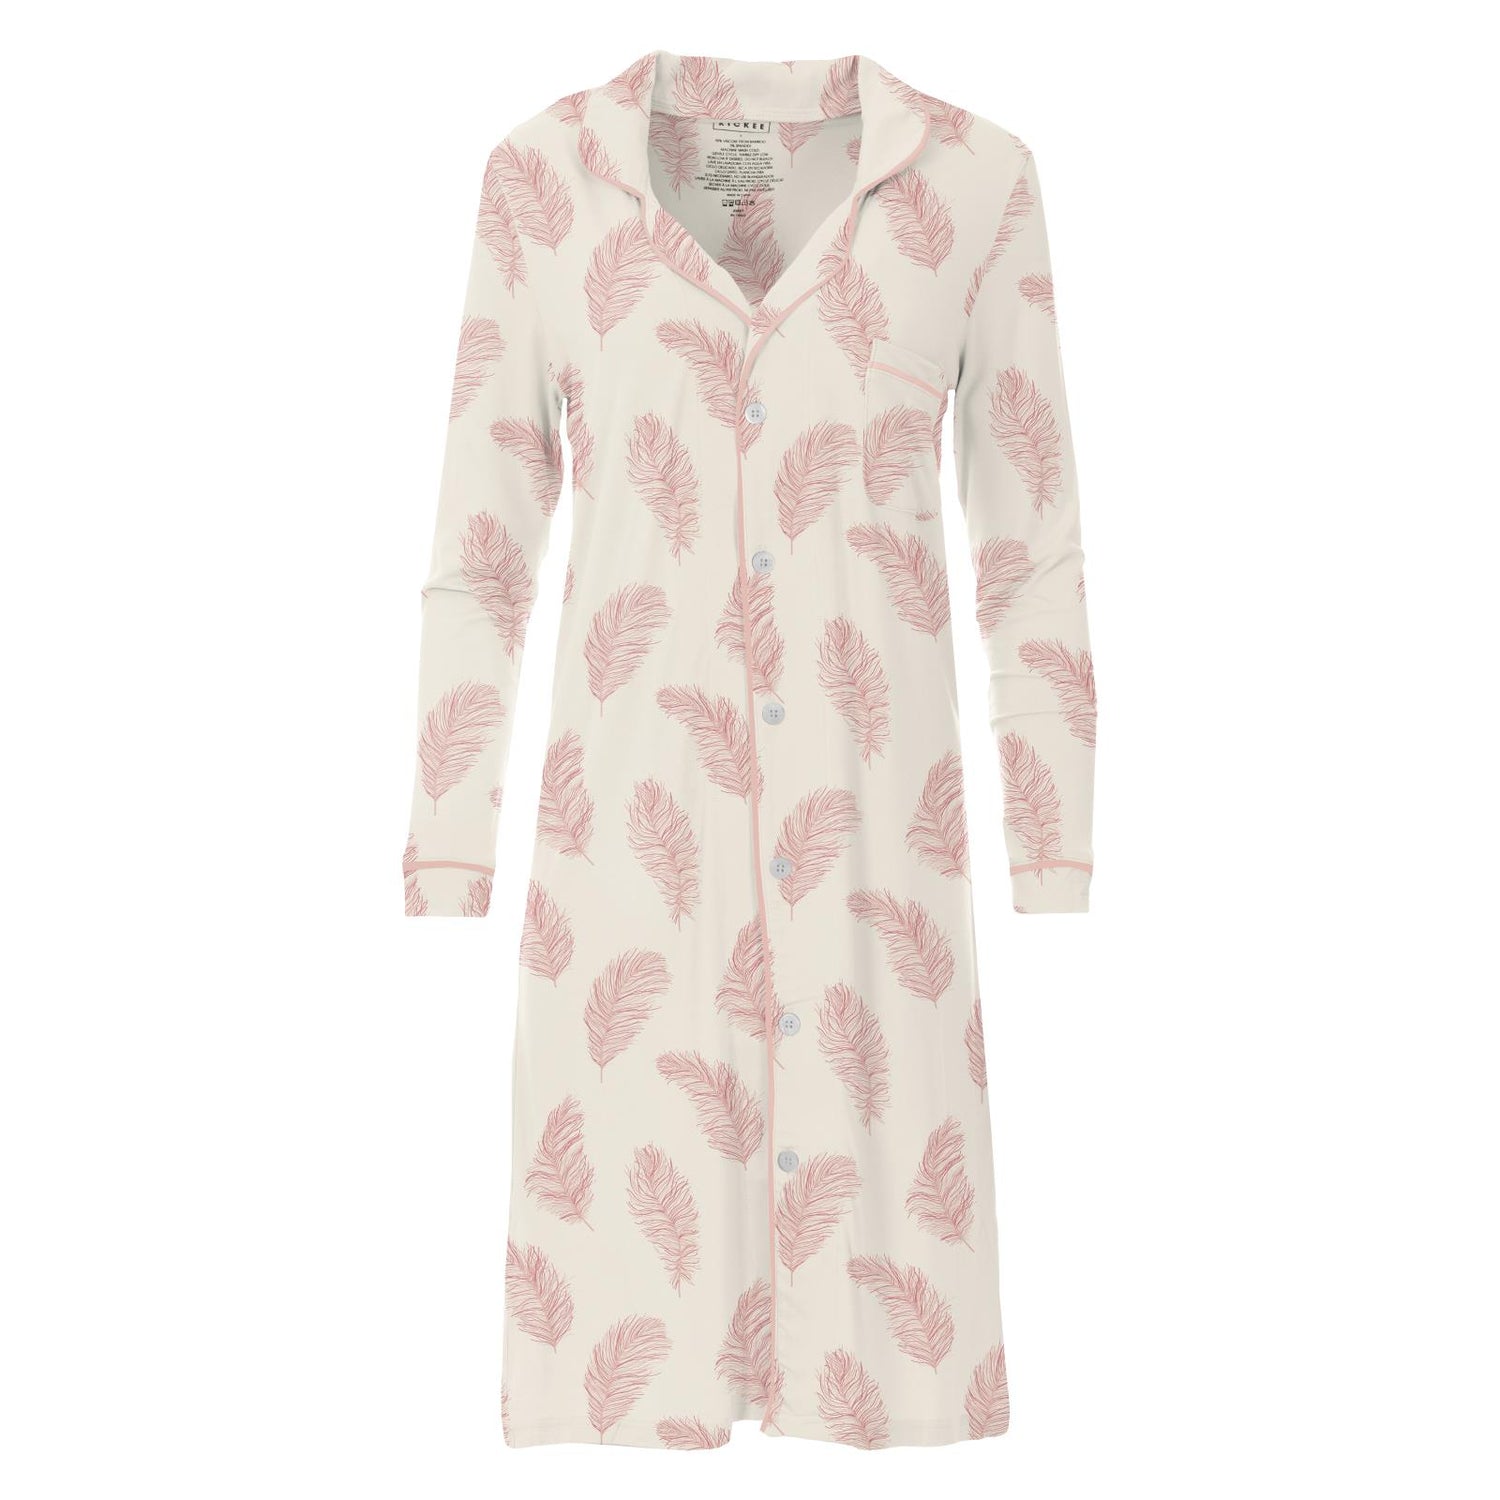 Women's Print Long Sleeve Button Down Nightshirt in Natural Feathers